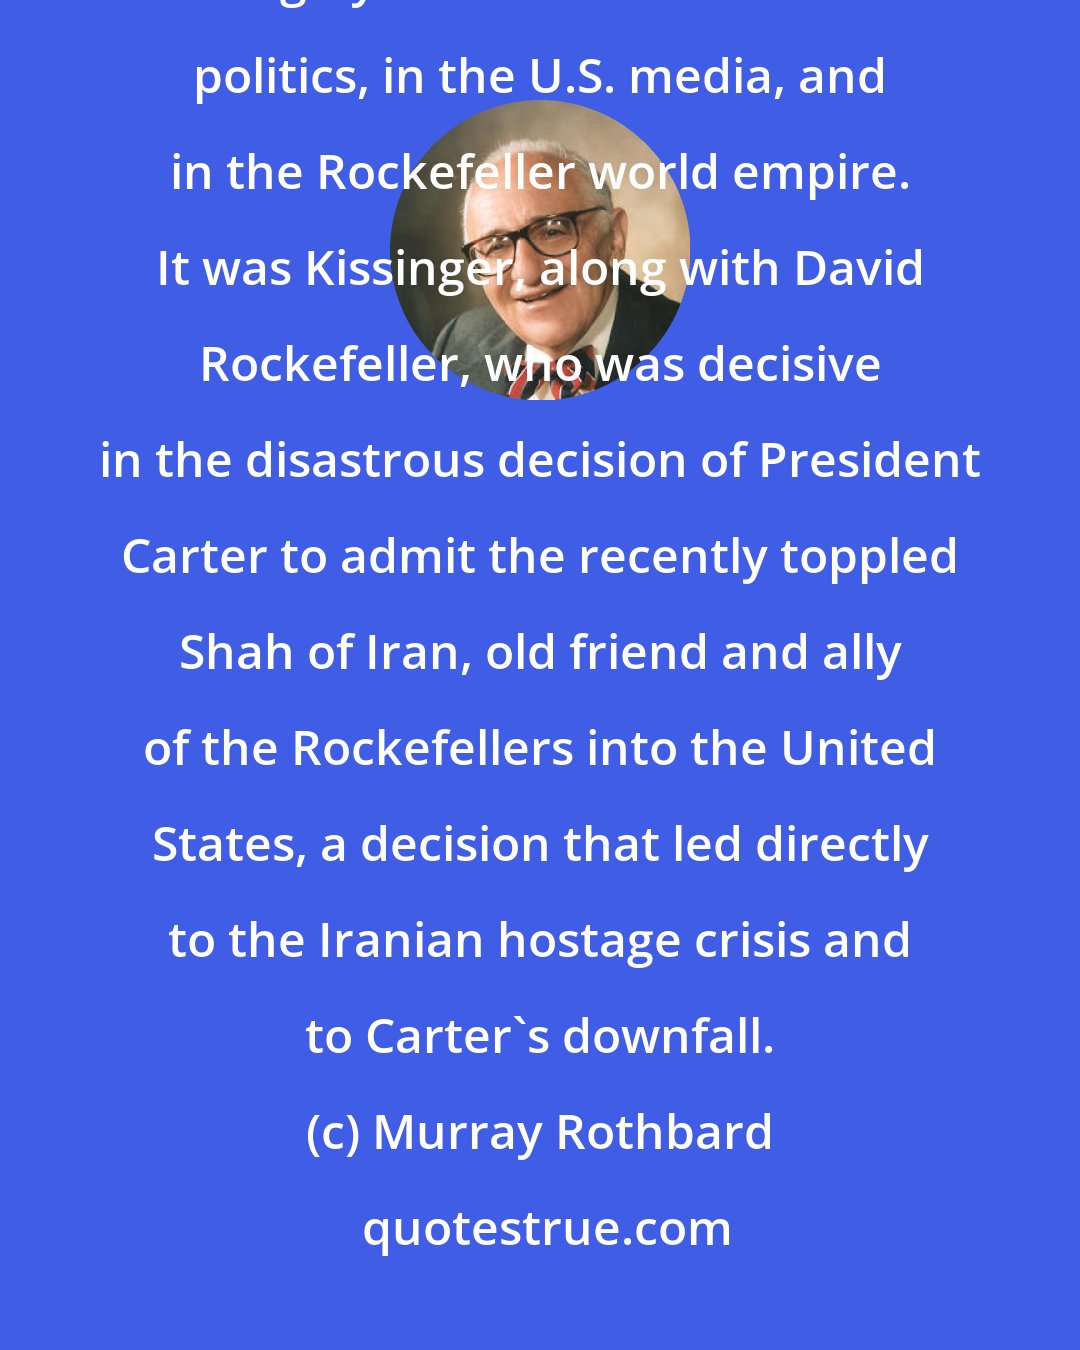 Murray Rothbard: Since leaving office in 1977, Dr. Kissinger has continued to play a highly influential role in U.S. politics, in the U.S. media, and in the Rockefeller world empire. It was Kissinger, along with David Rockefeller, who was decisive in the disastrous decision of President Carter to admit the recently toppled Shah of Iran, old friend and ally of the Rockefellers into the United States, a decision that led directly to the Iranian hostage crisis and to Carter's downfall.